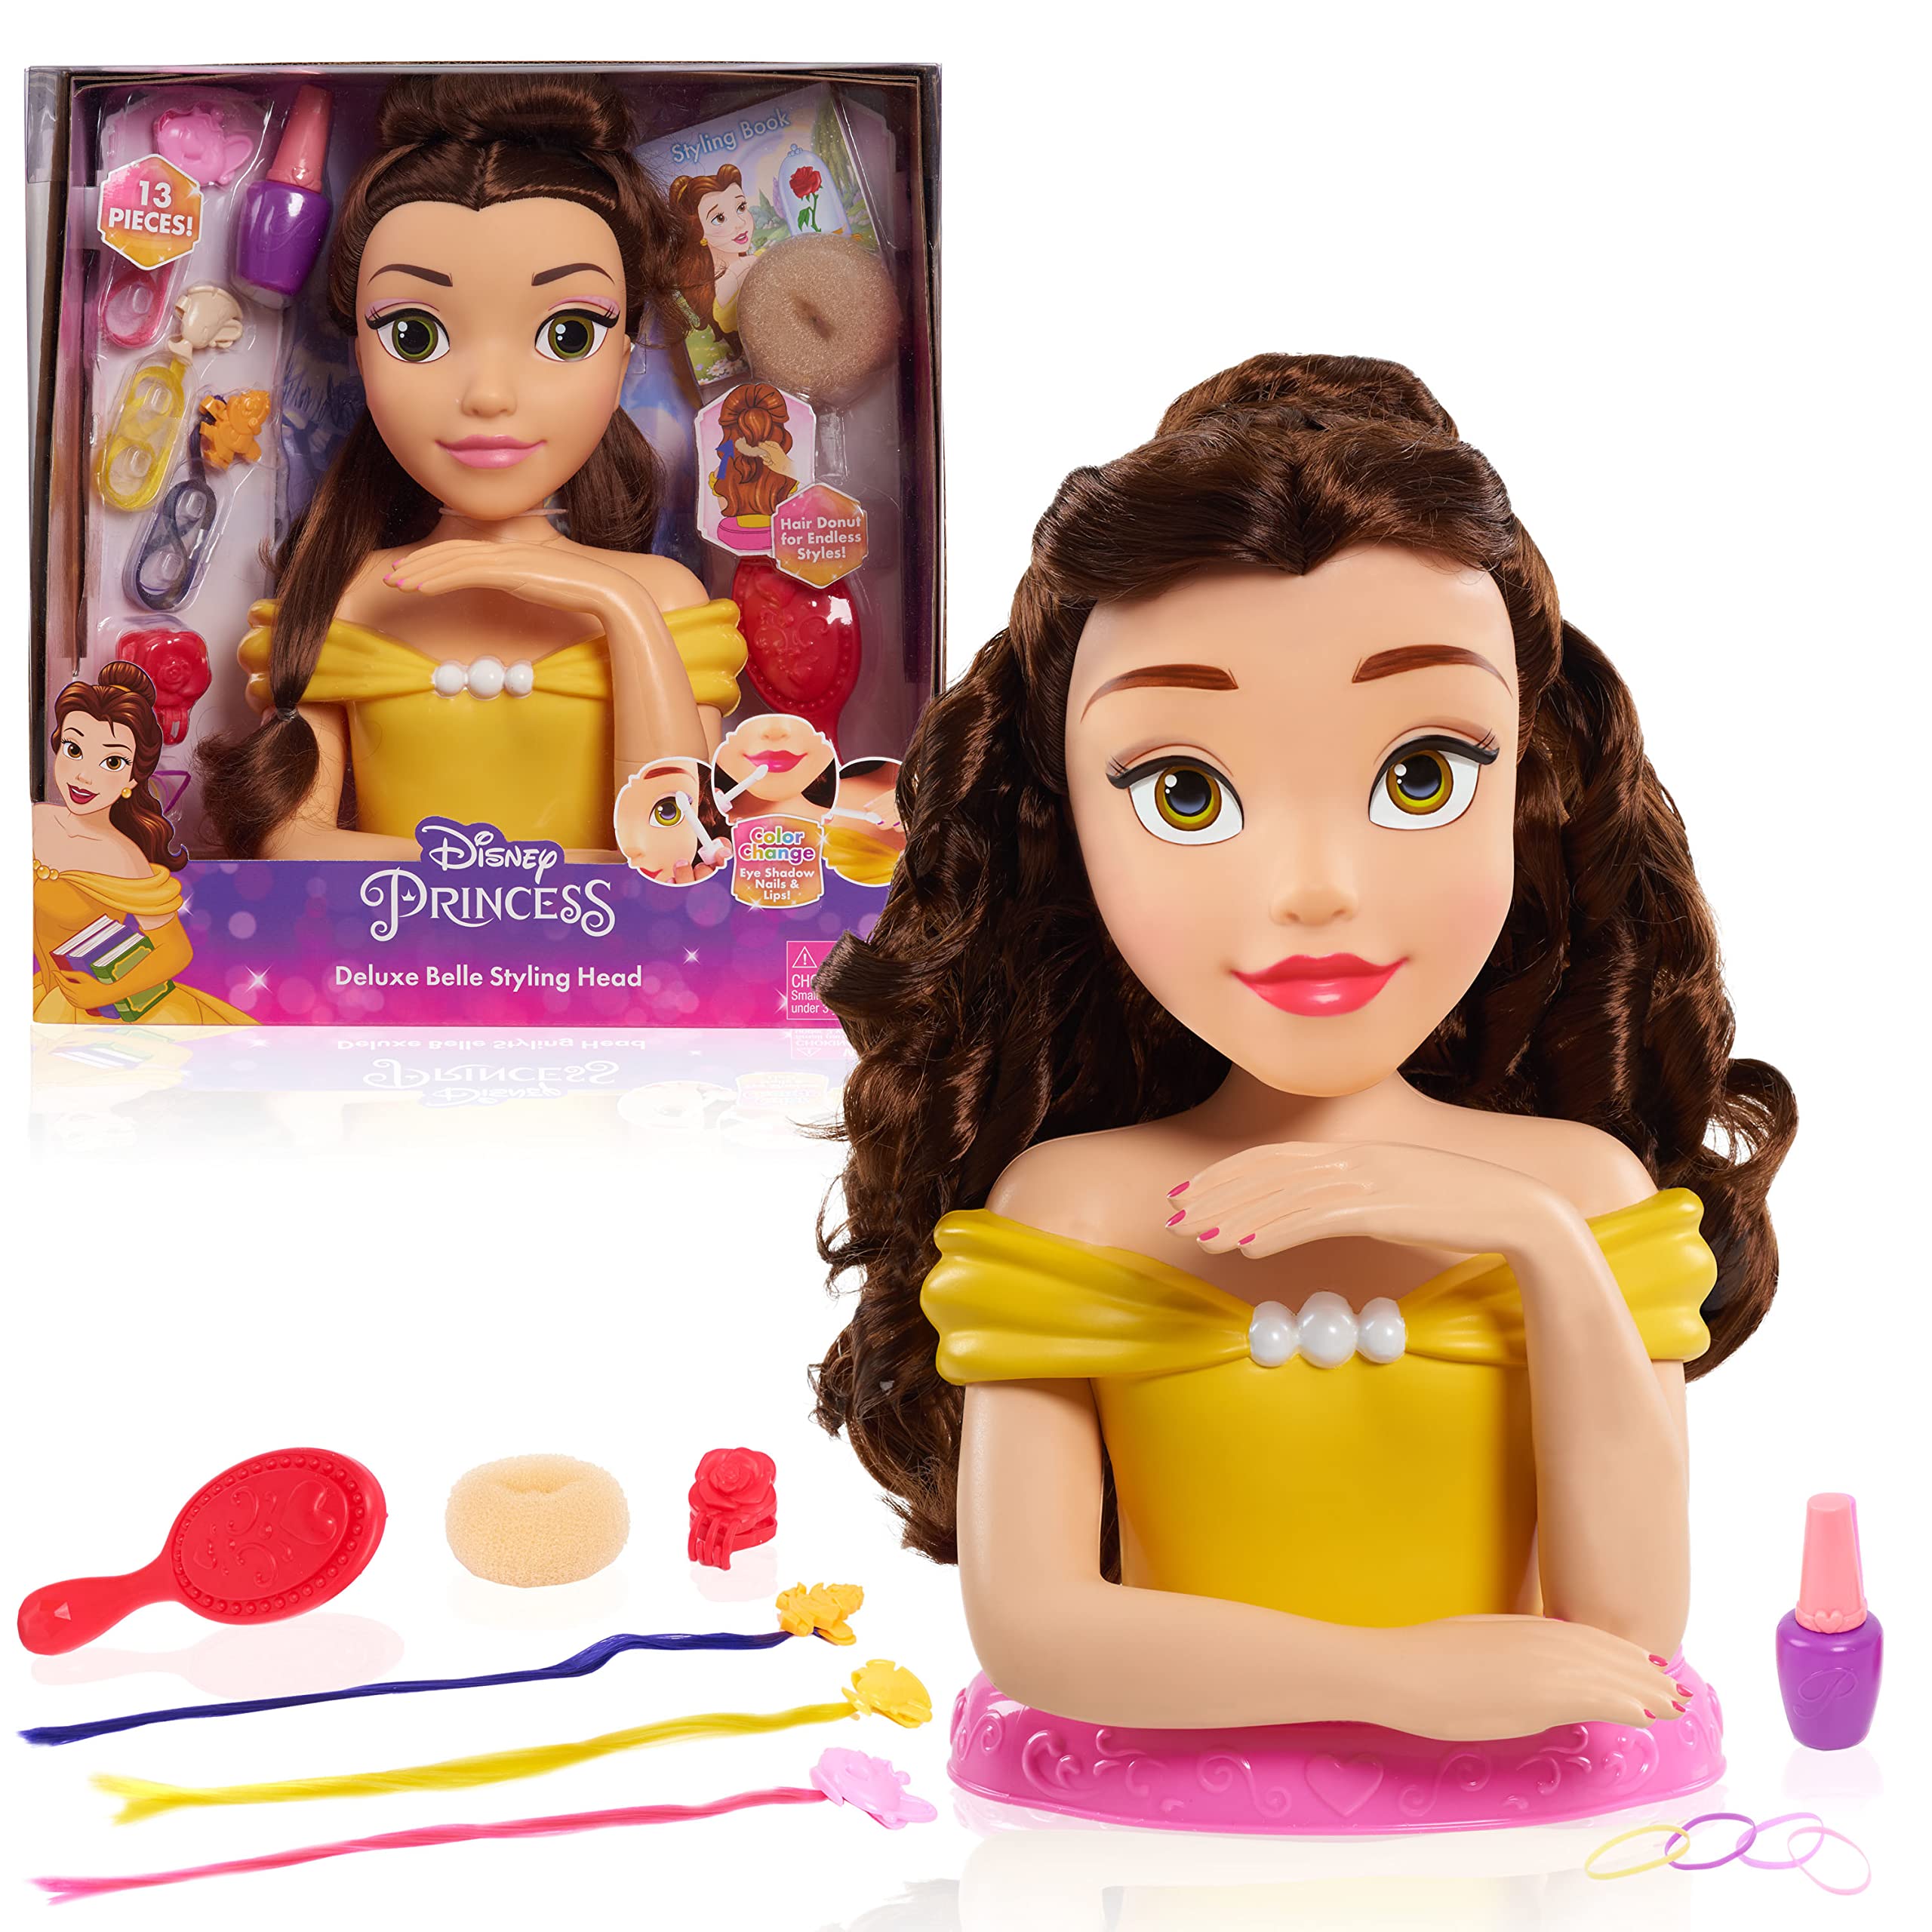 13-Piece Disney Princess Deluxe Belle Styling Head Toy $10.22 + Free Shipping w/ Walmart+ or on $35+